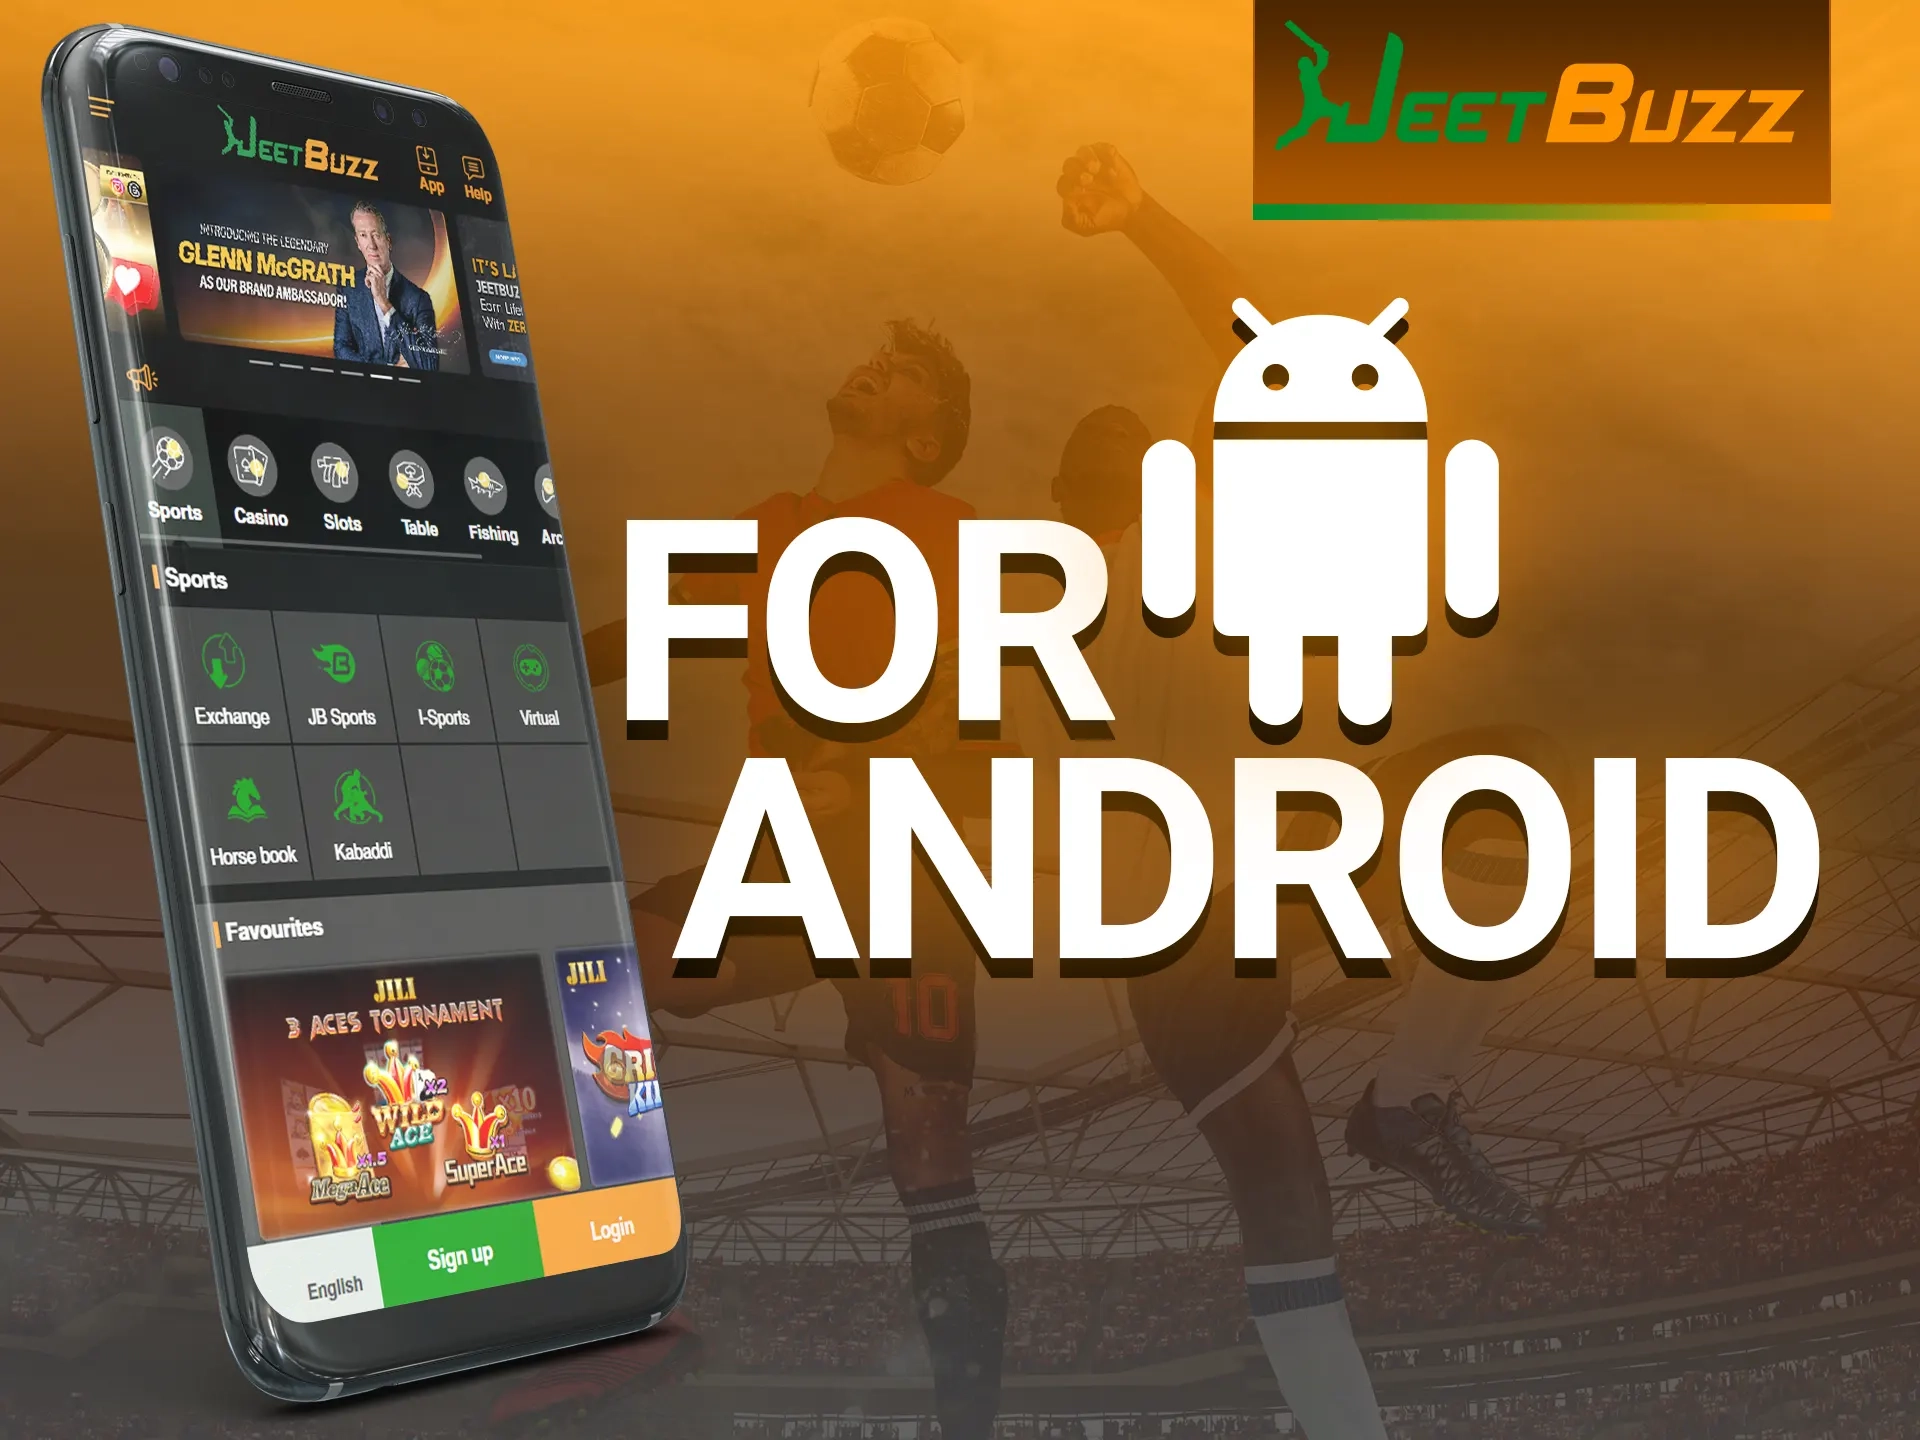 The Jeetbuzz app can be installed on a variety of Android devices.